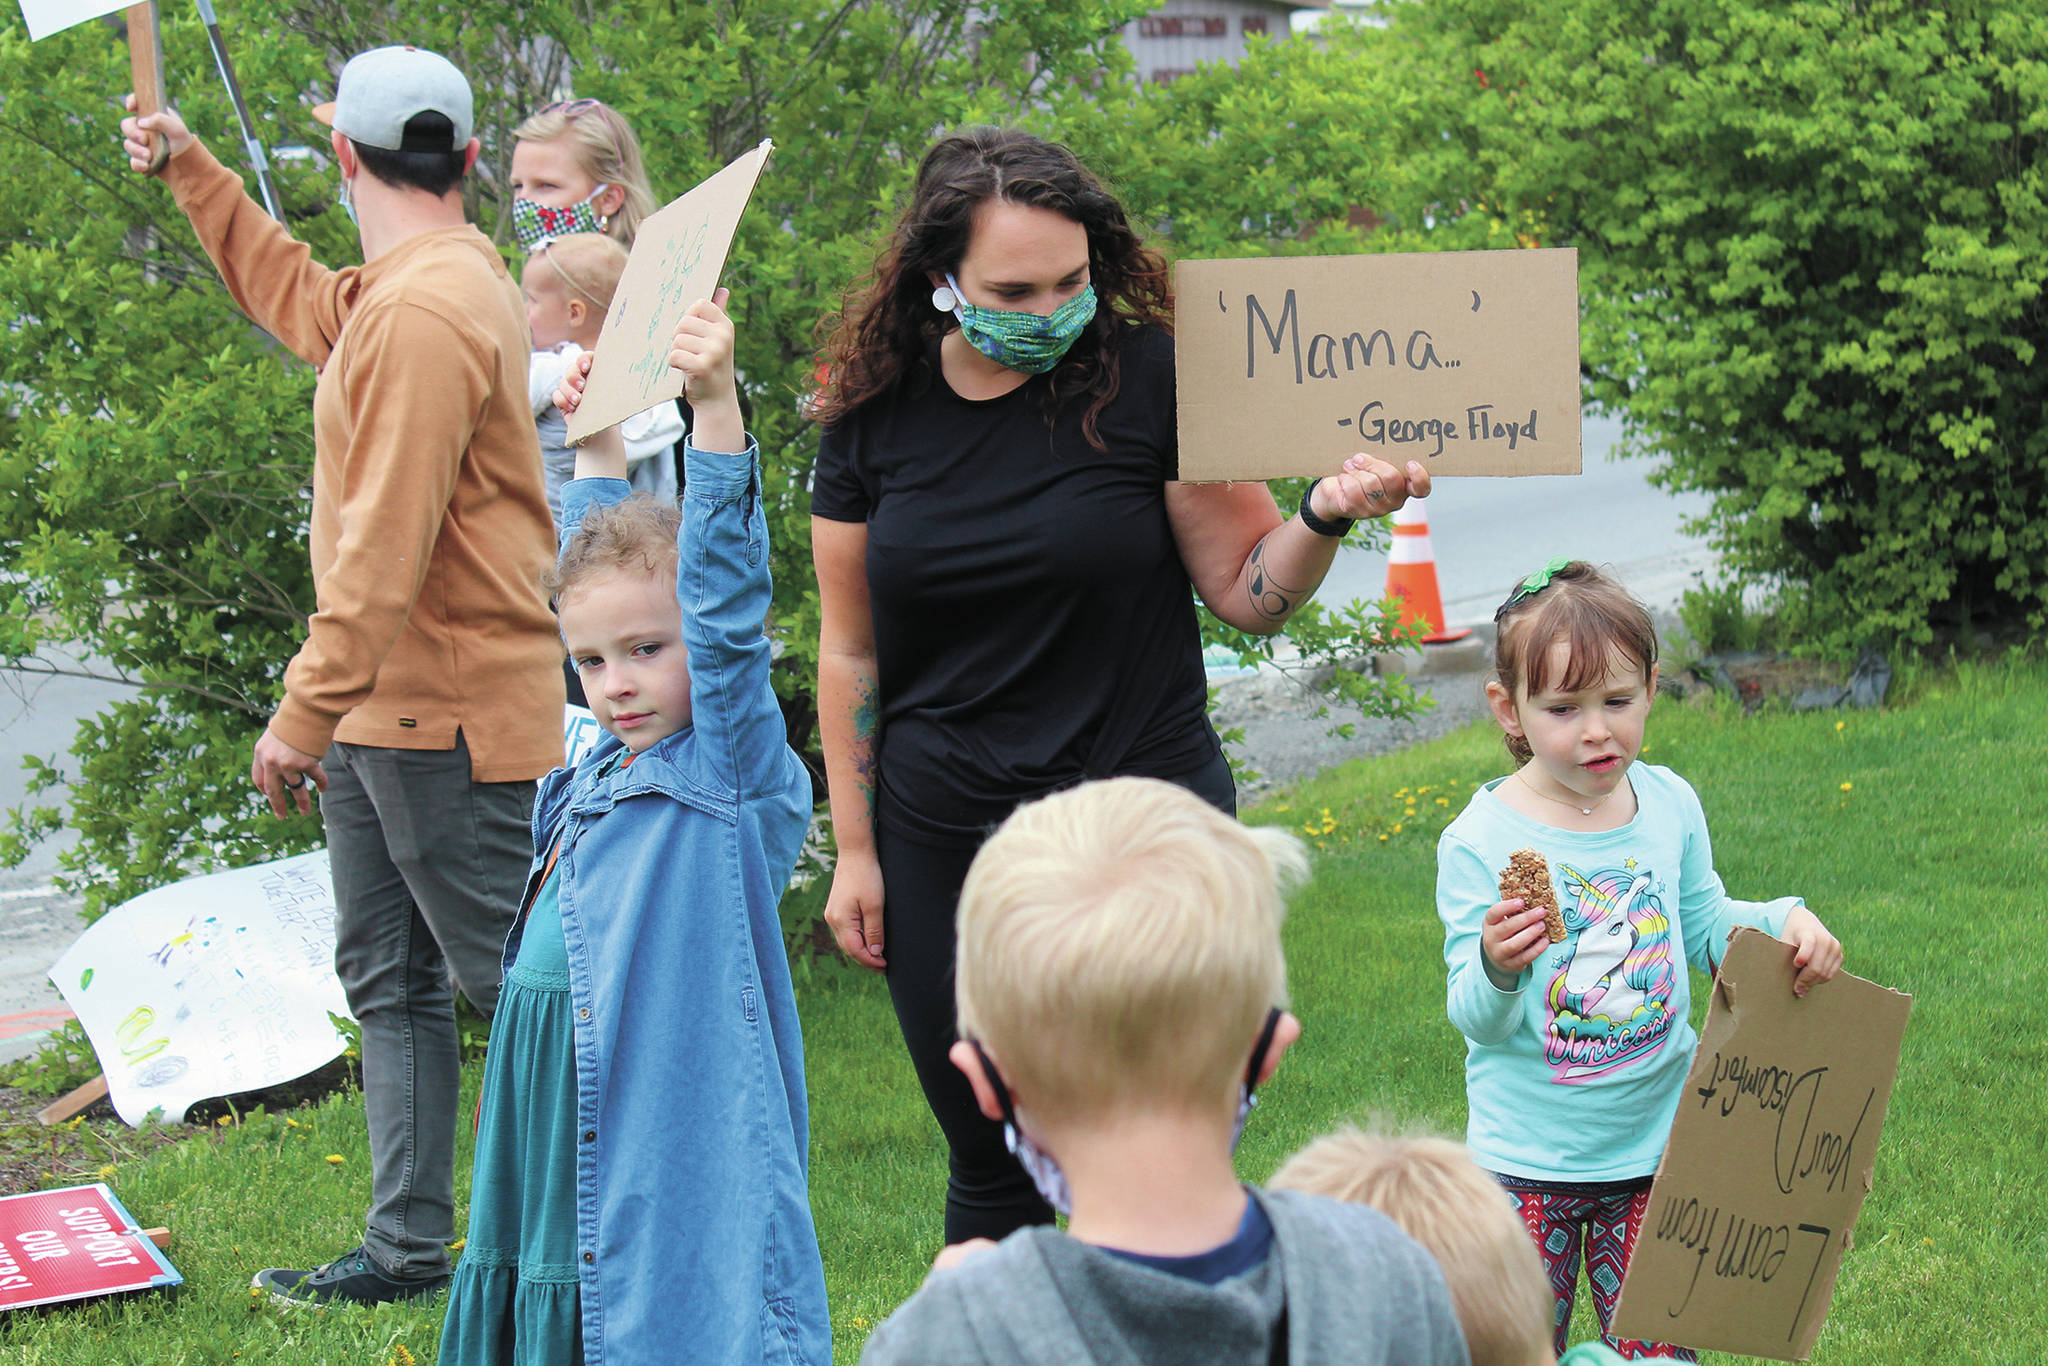 A woman holds a sign that reads “Mama,” which was one of the last words of George Floyd before he died in police custody in Minneapolis, Minnesota last week. Several families with young children participated in a Black Lives Matter demonstration Tuesday, June 2, 2020 at WKFL Park in Homer, Alaska. (Photo by Megan Pacer/Homer News)